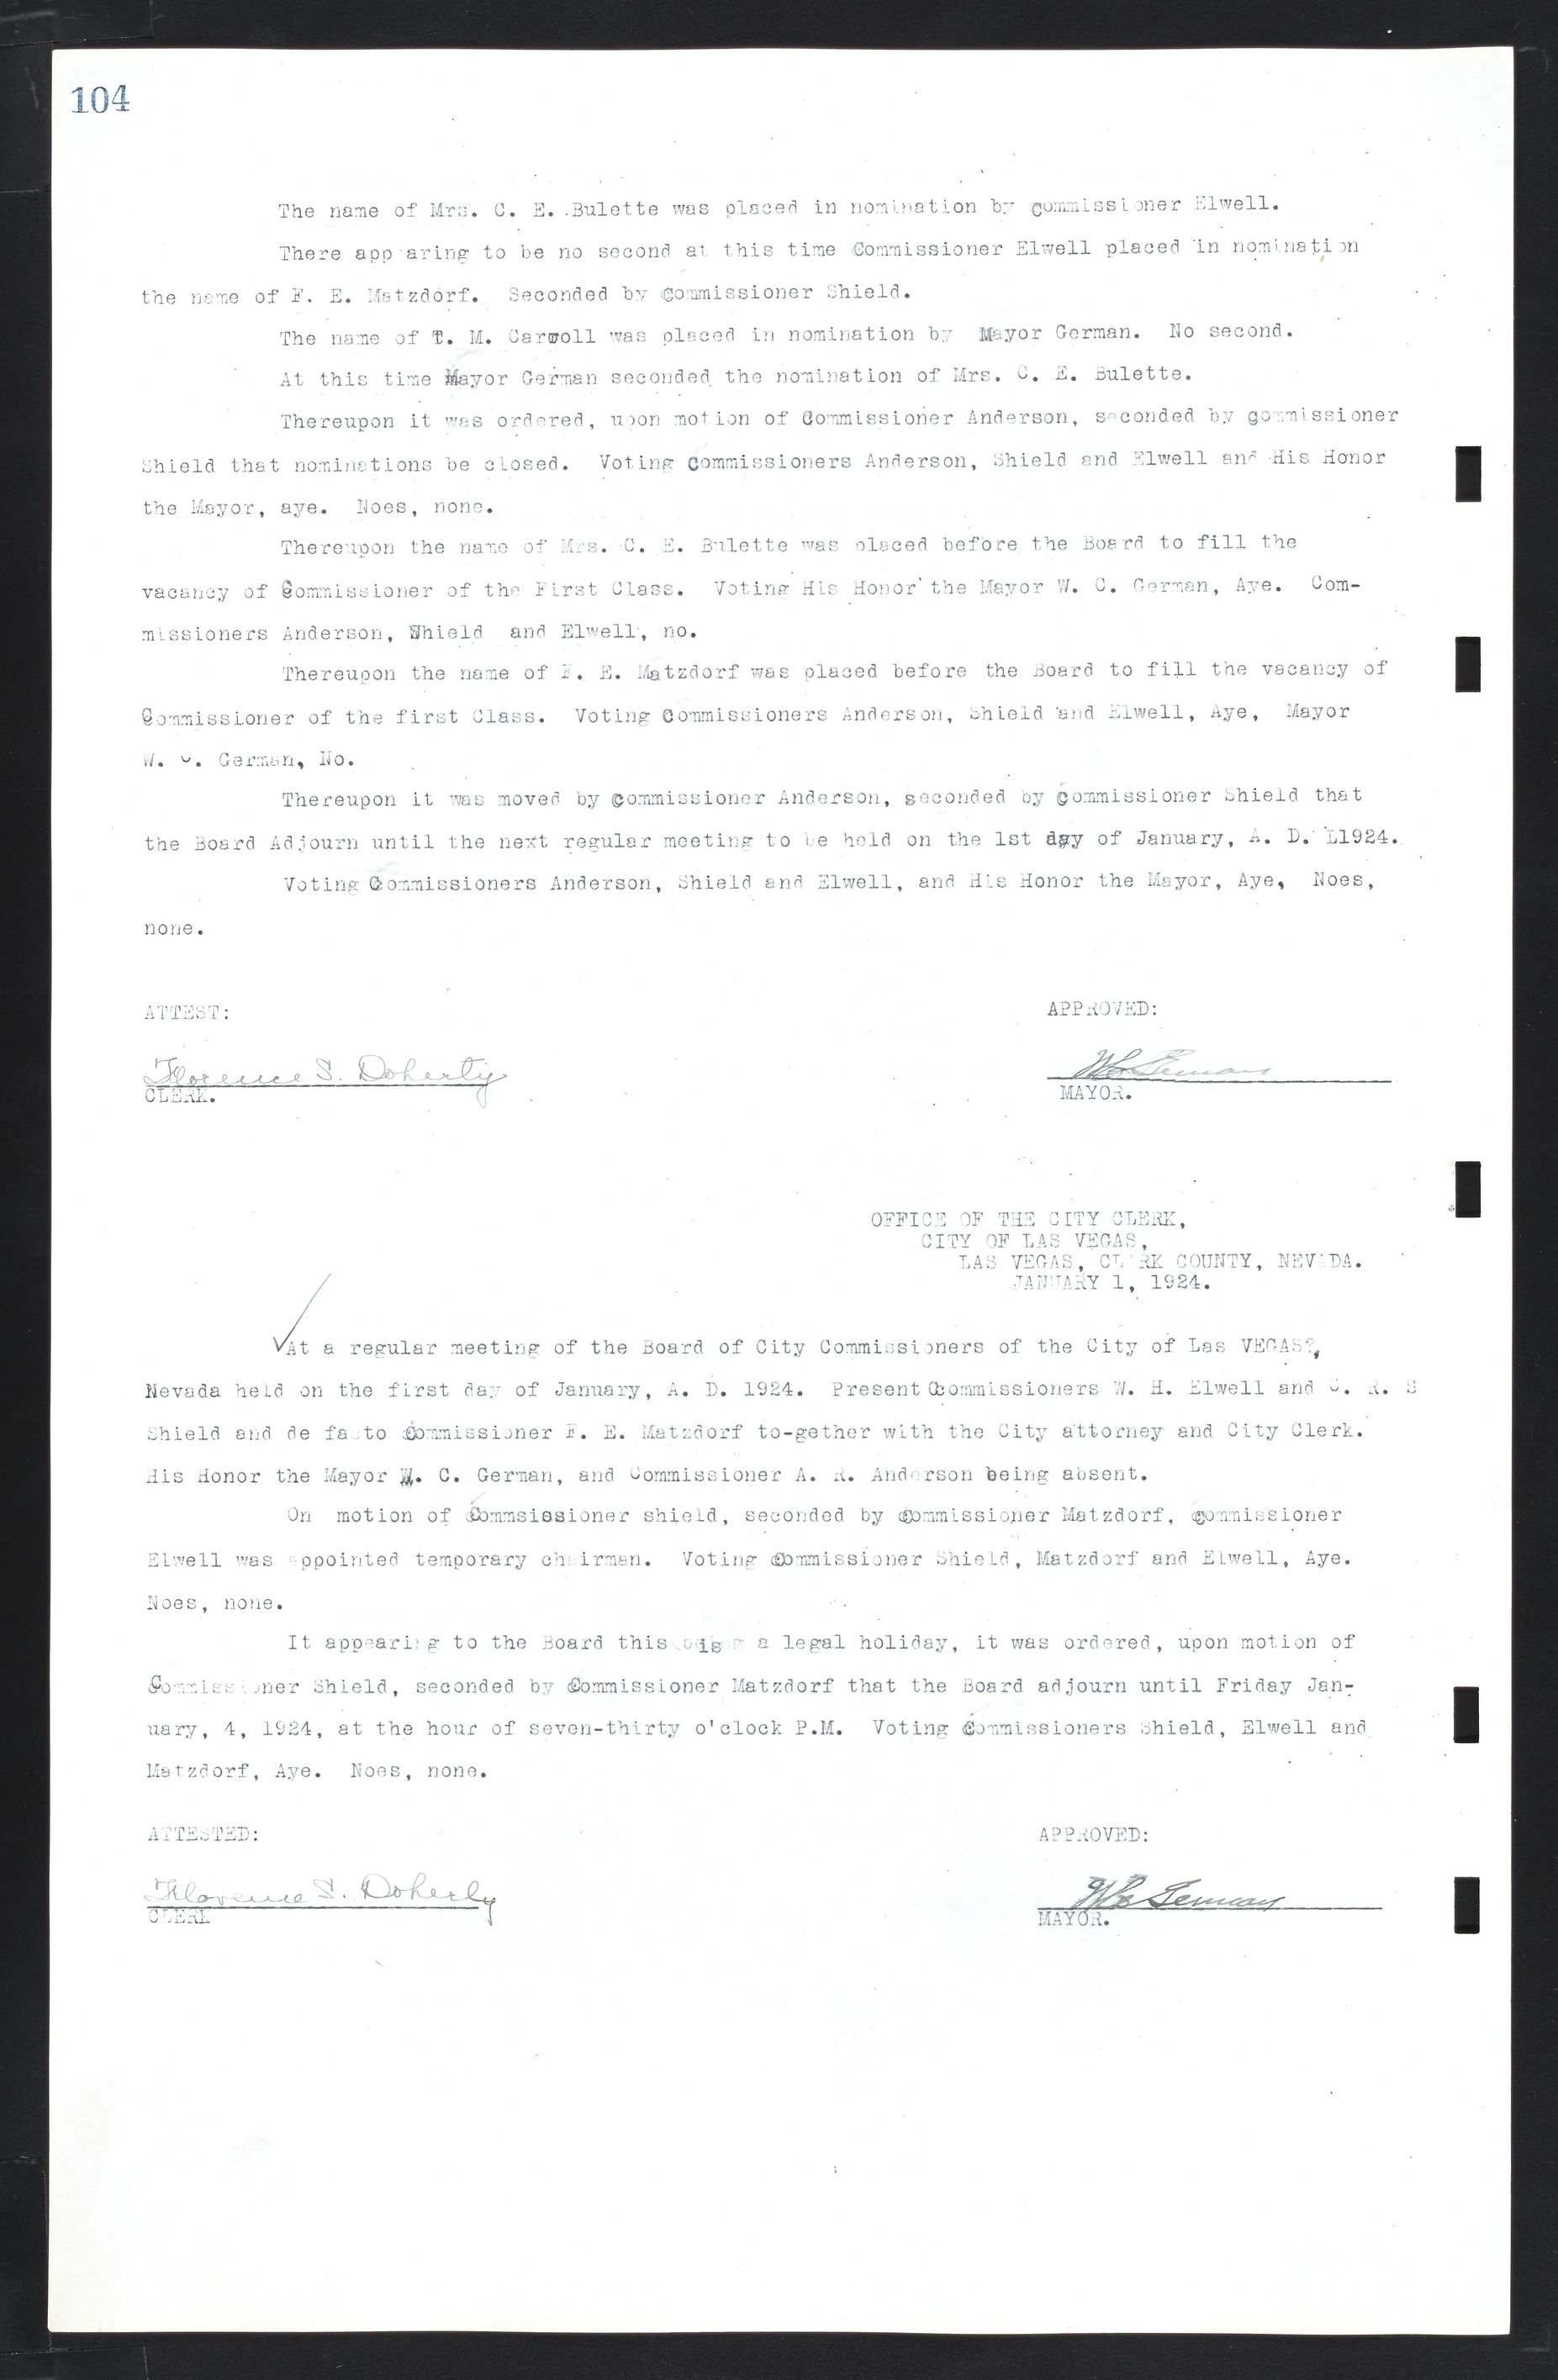 Las Vegas City Commission Minutes, March 1, 1922 to May 10, 1929, lvc000002-111